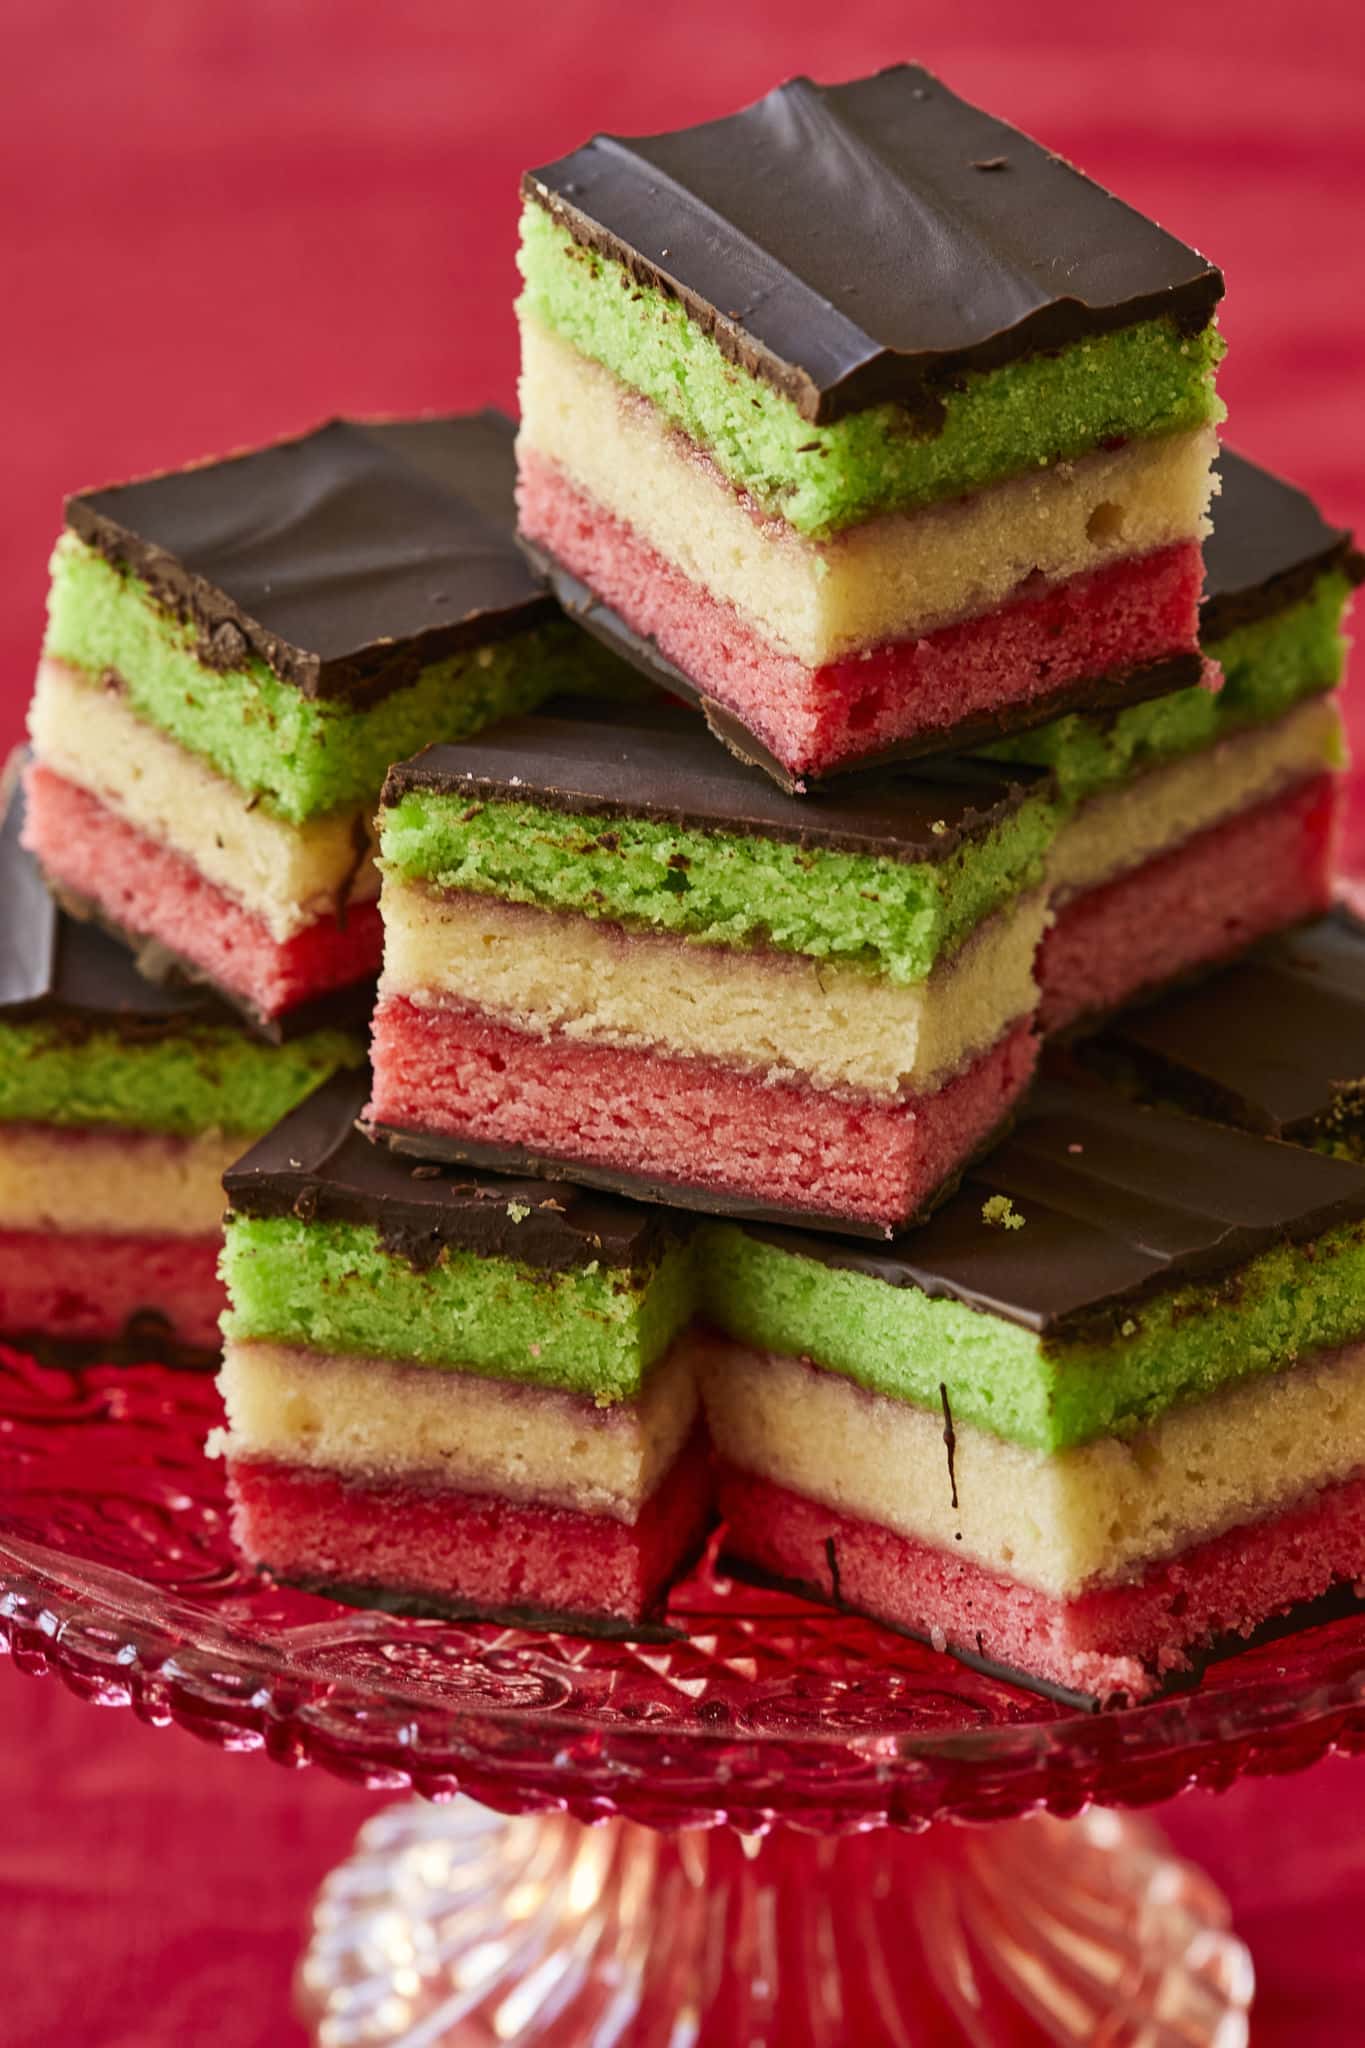 A closeup image of Italian Rainbow cookies show layers of multi-colored almond cake, sandwiched between two layers of chocolate.